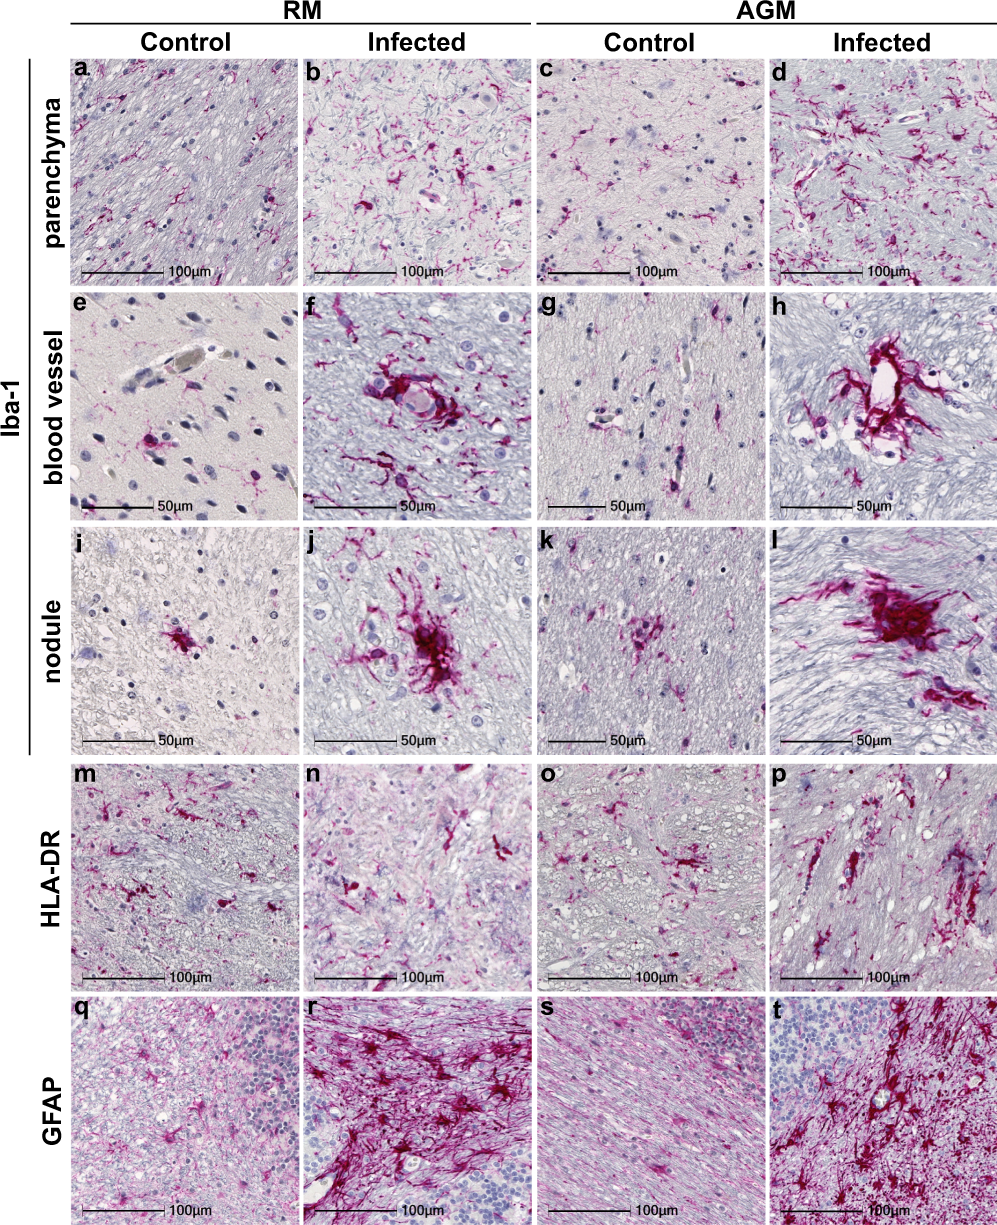 Neuropathology and virus in brain of SARS-CoV-2 infected non-human primates  | Nature Communications